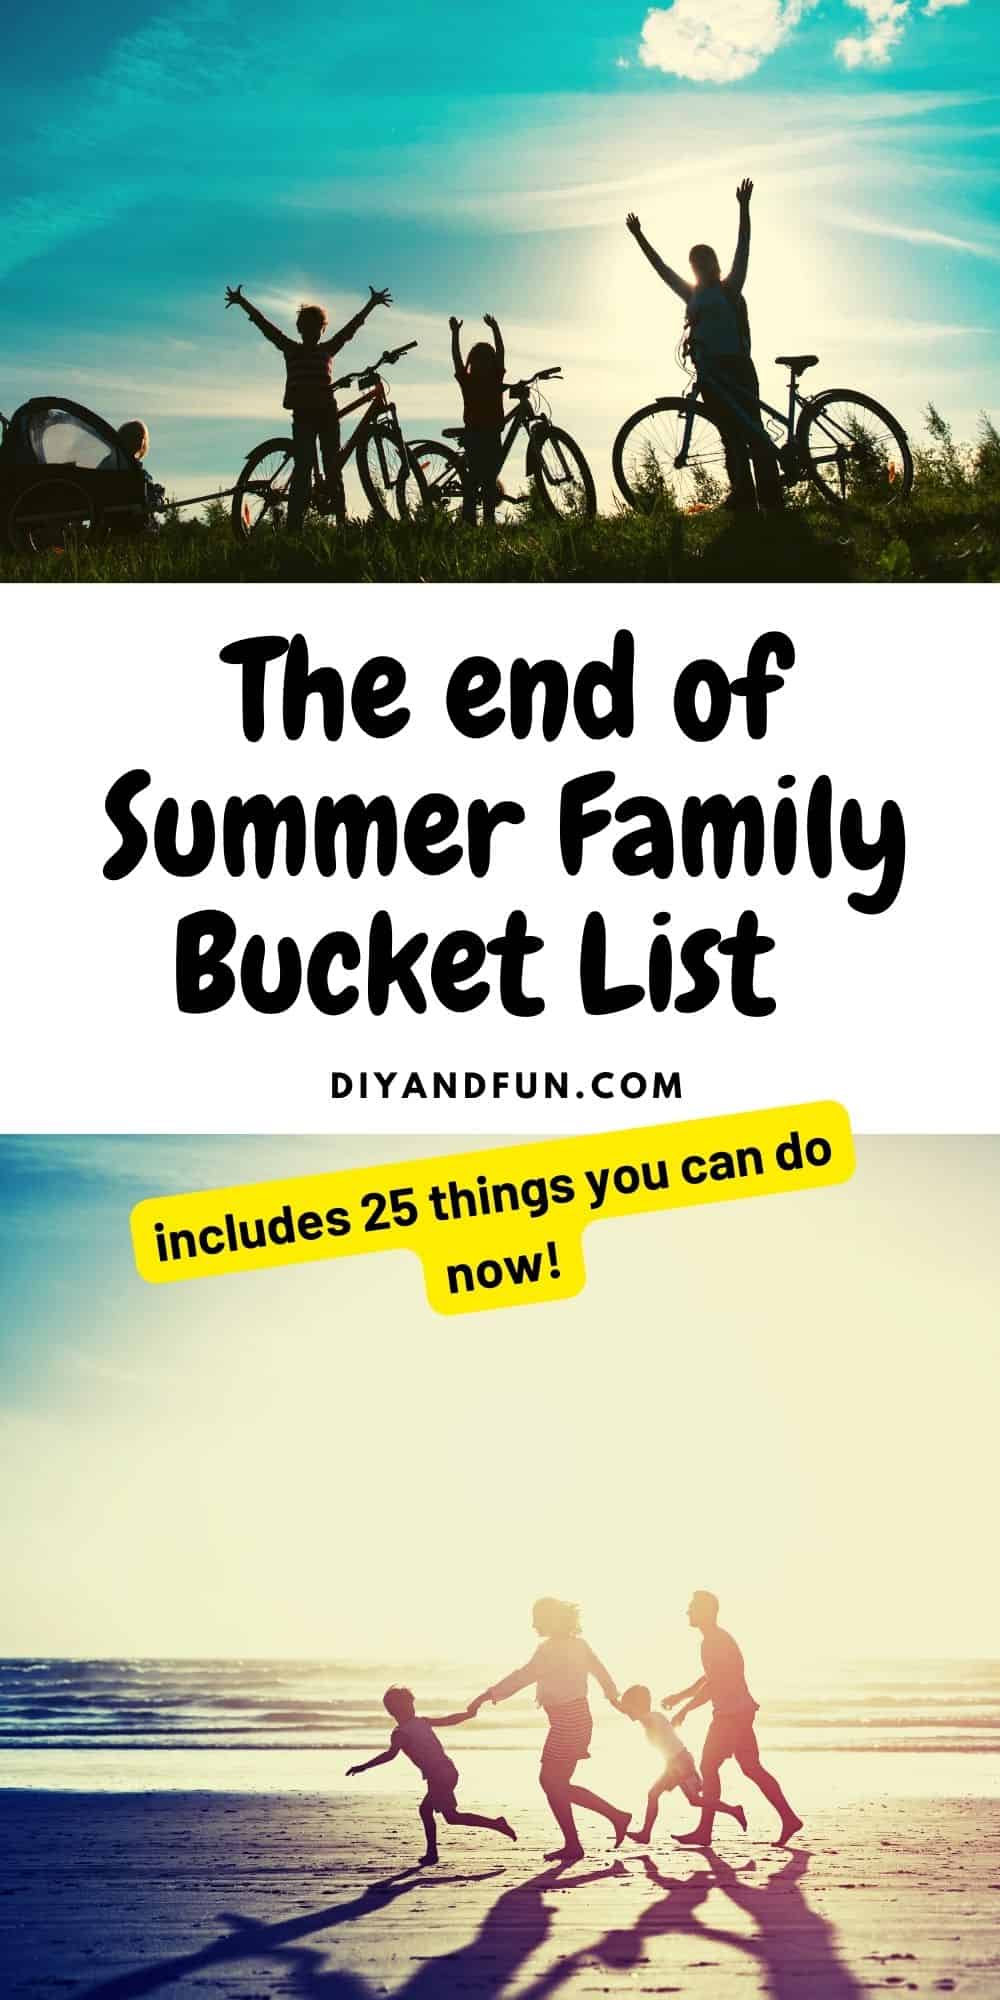 The End of Summer Family Bucket List , the ultimate listing for fun family friendly activities to enjoy before fall.